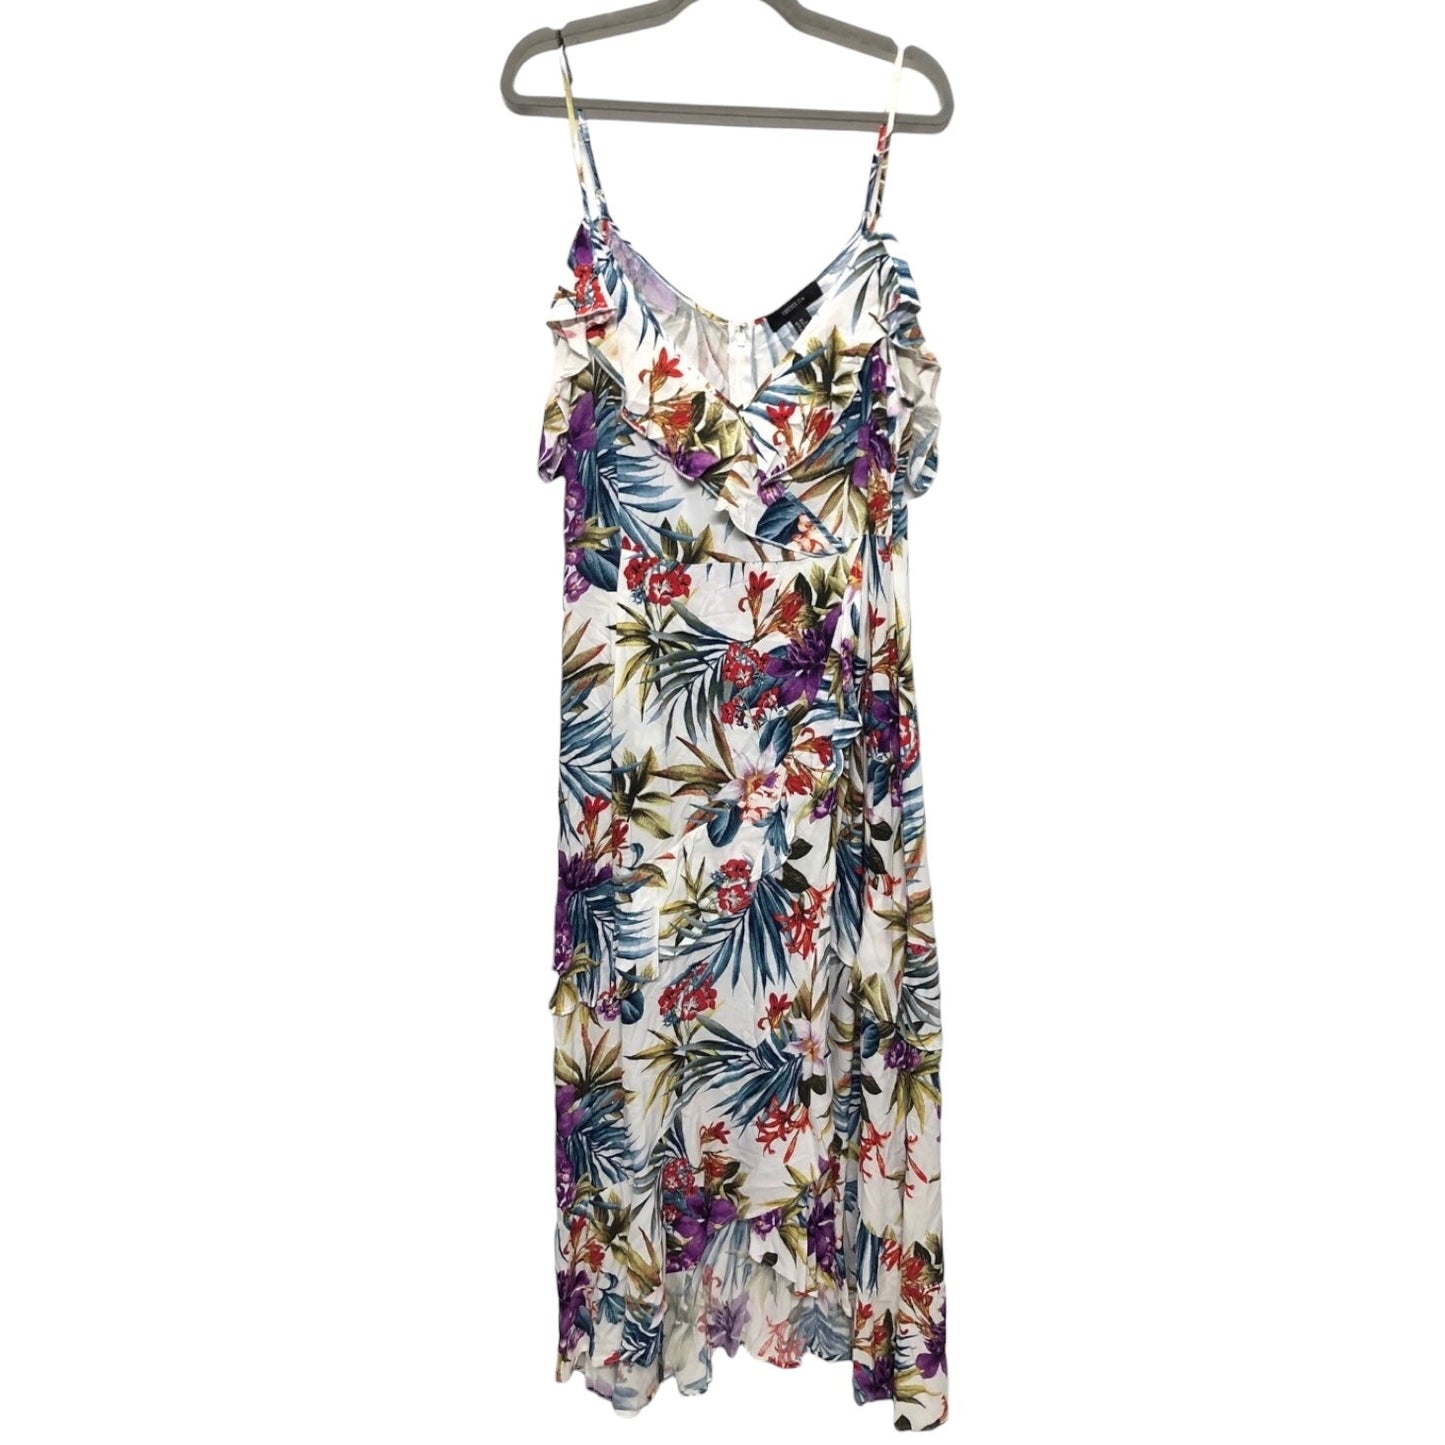 Tropical Print Dress Casual Maxi Forever 21, Size 1x